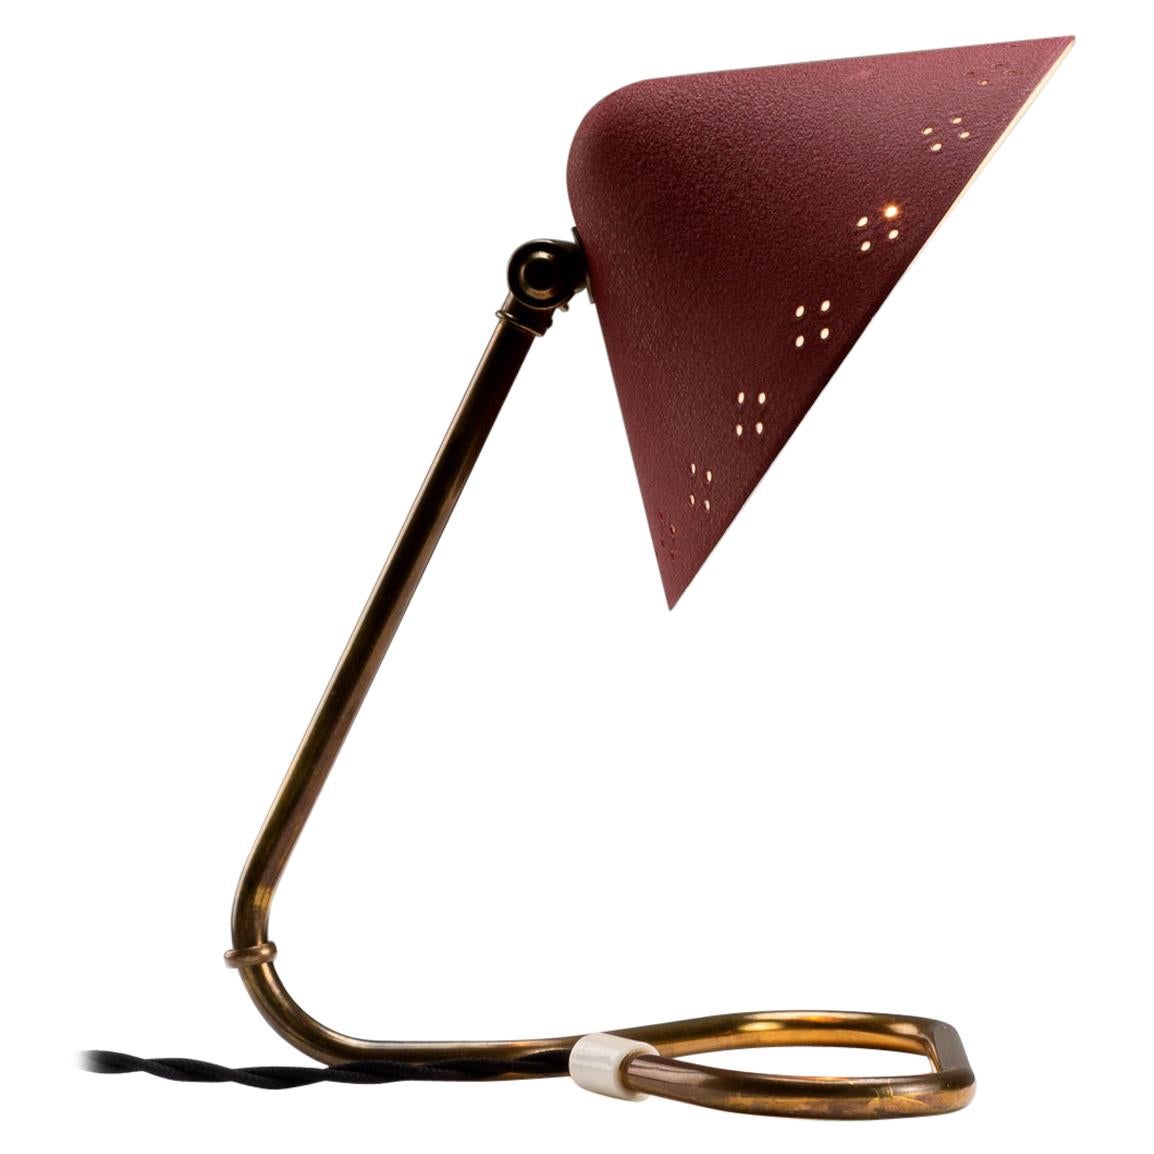 Red Lacquered Aluminium and Brass Table Lamp by Gnosjö Konstsmide, Sweden, 1950s For Sale